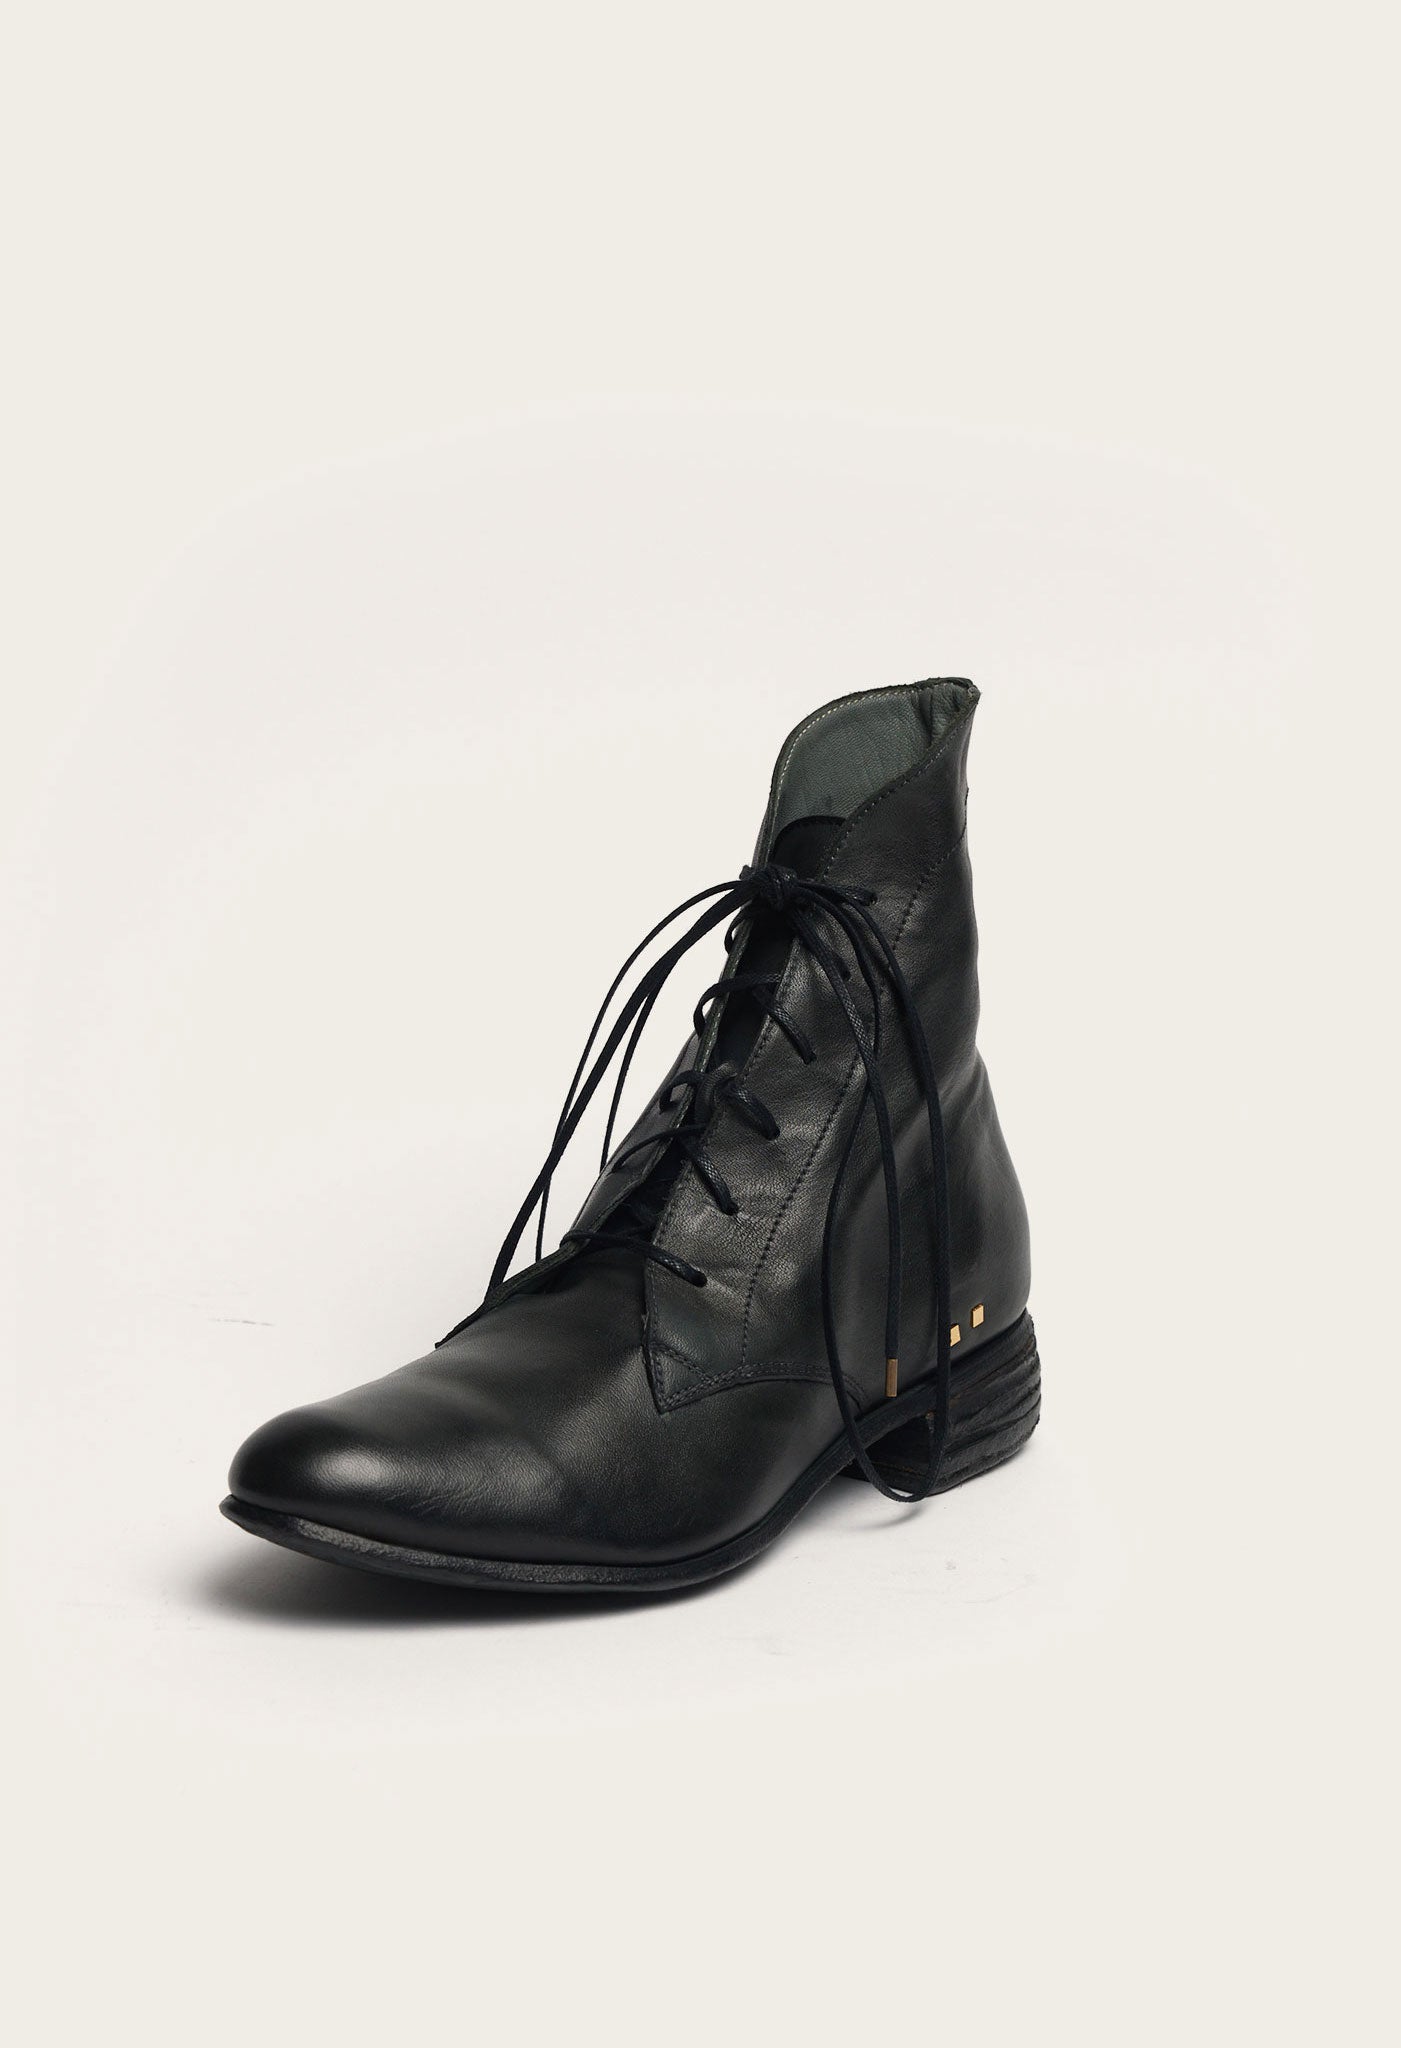 The Women's Mansfield: Gasoline Leather